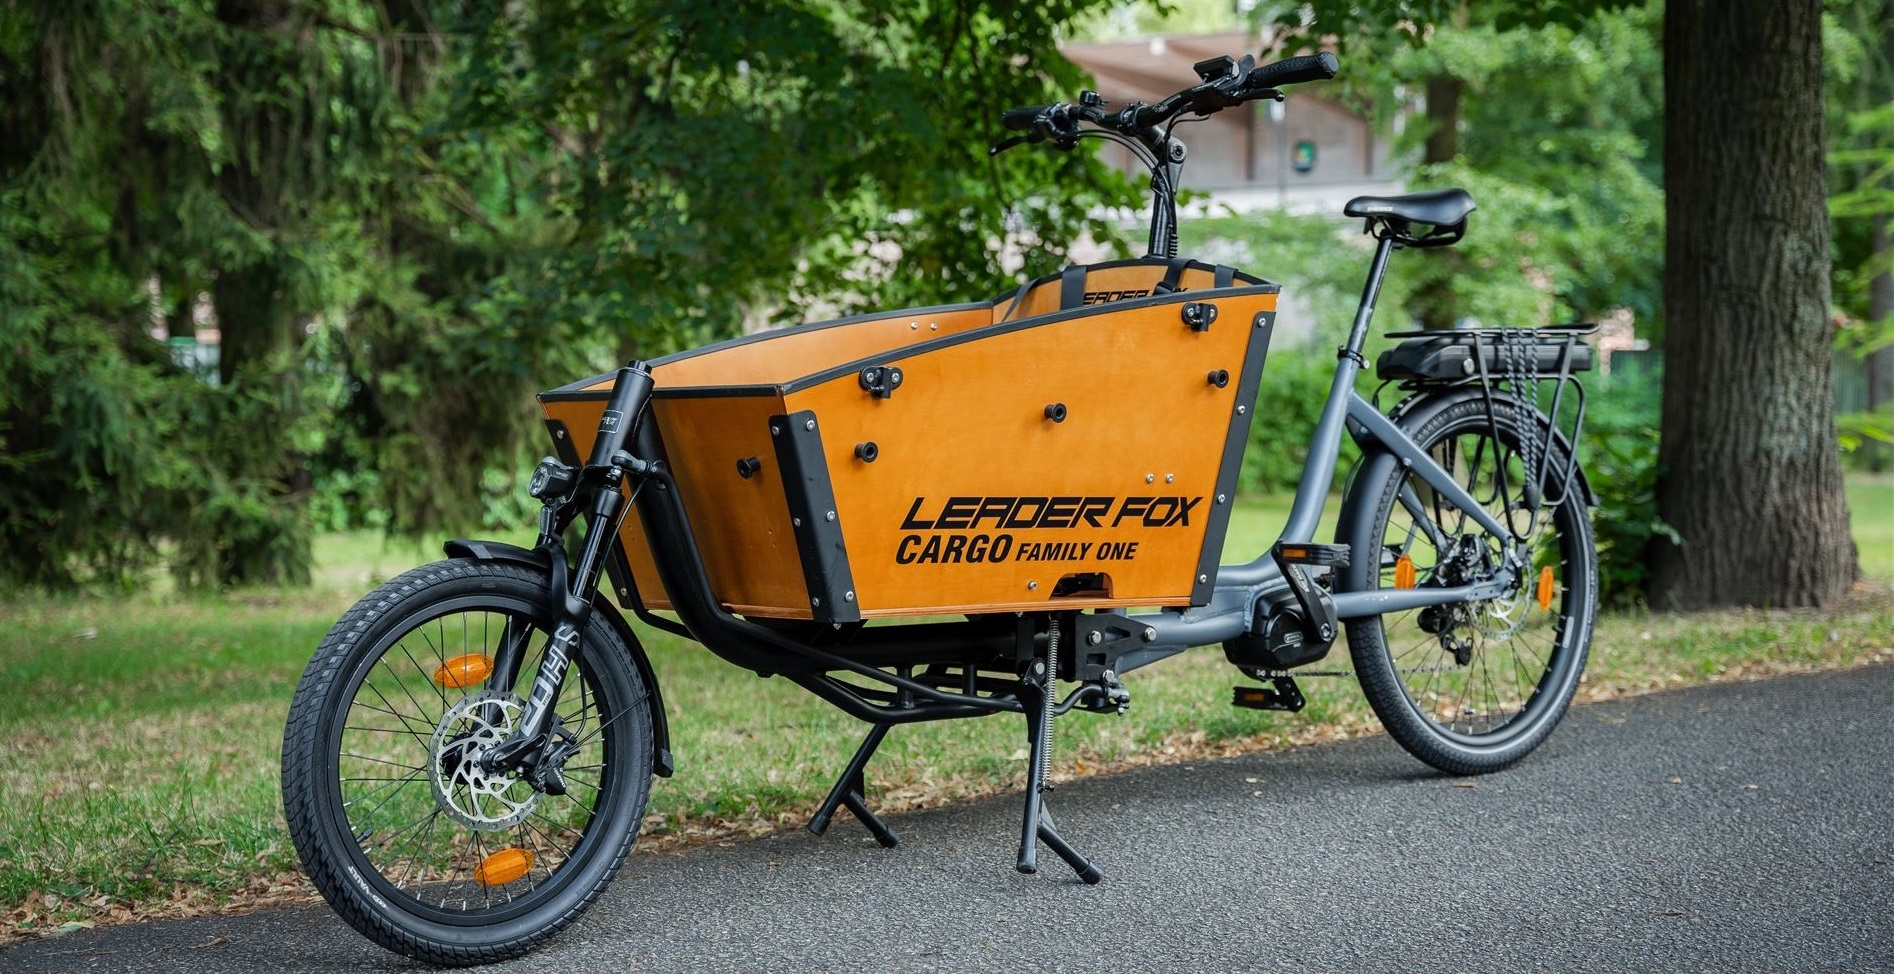 The new Leader Fox Cargo Family ONE: The perfect partner not only for family adventures